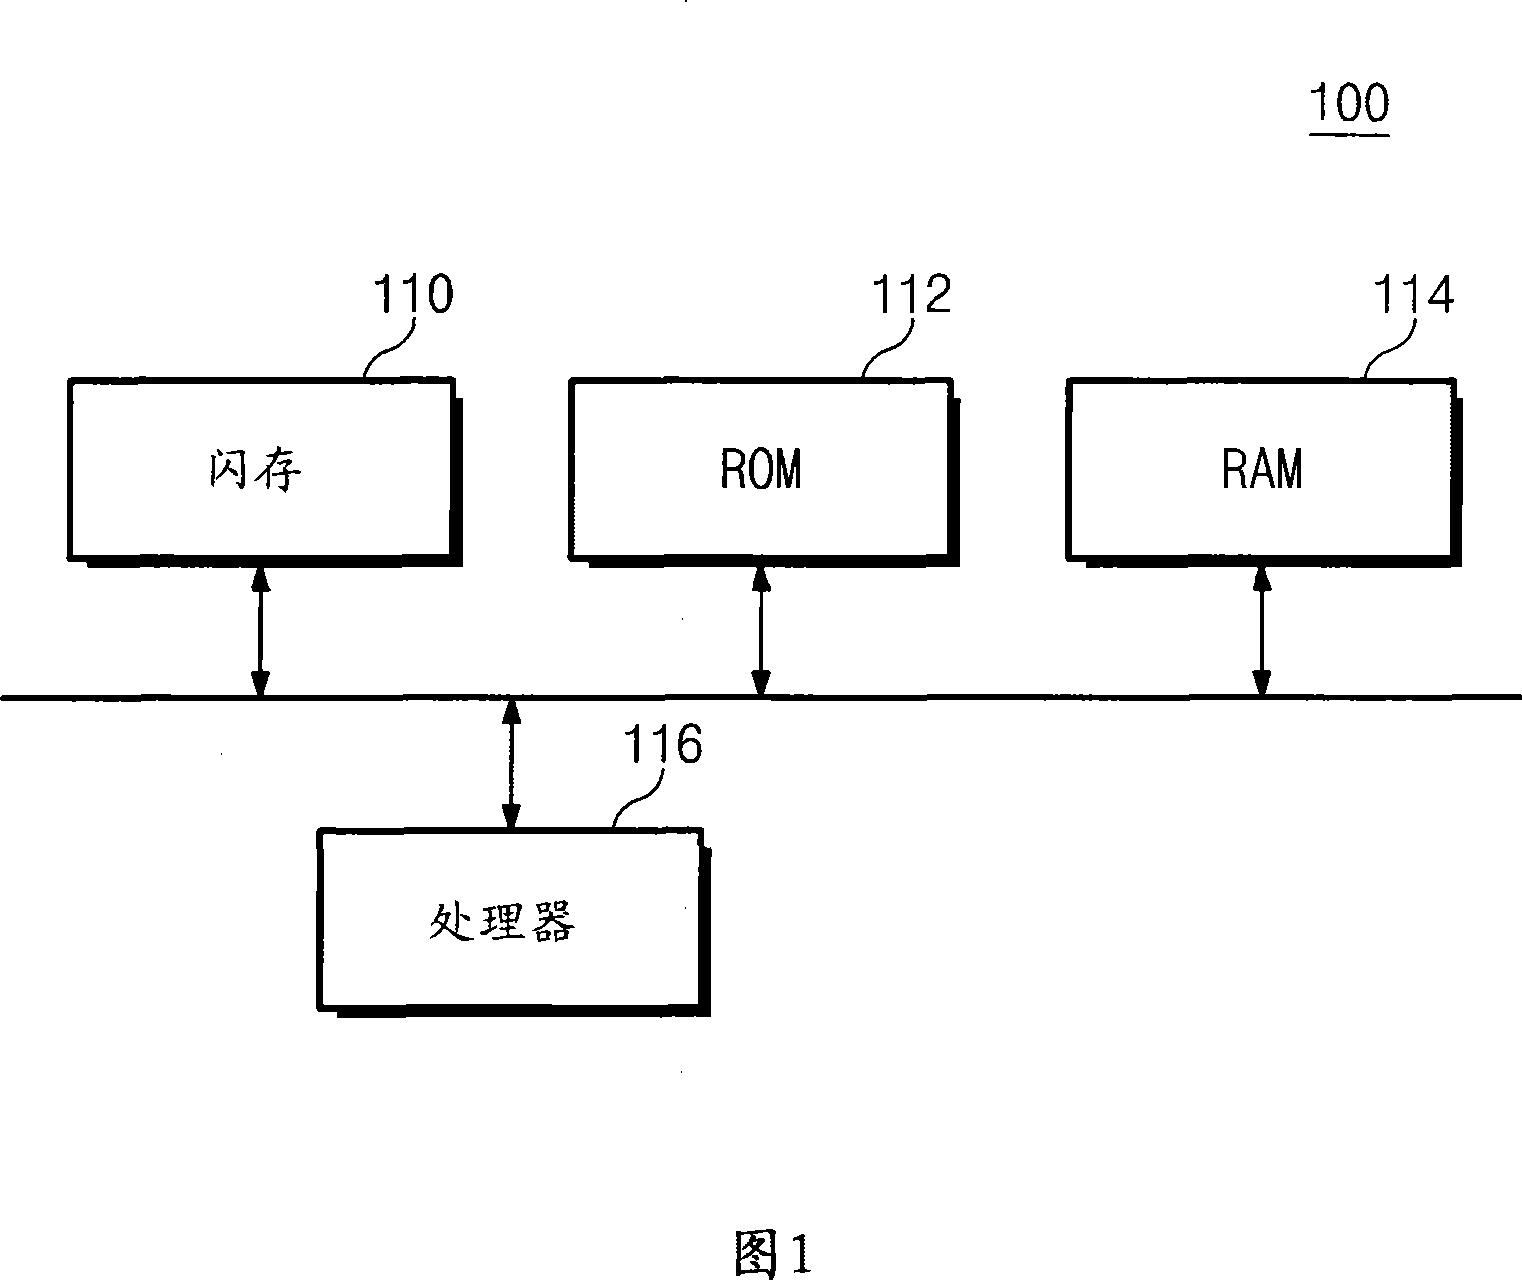 Memory mapping system and method